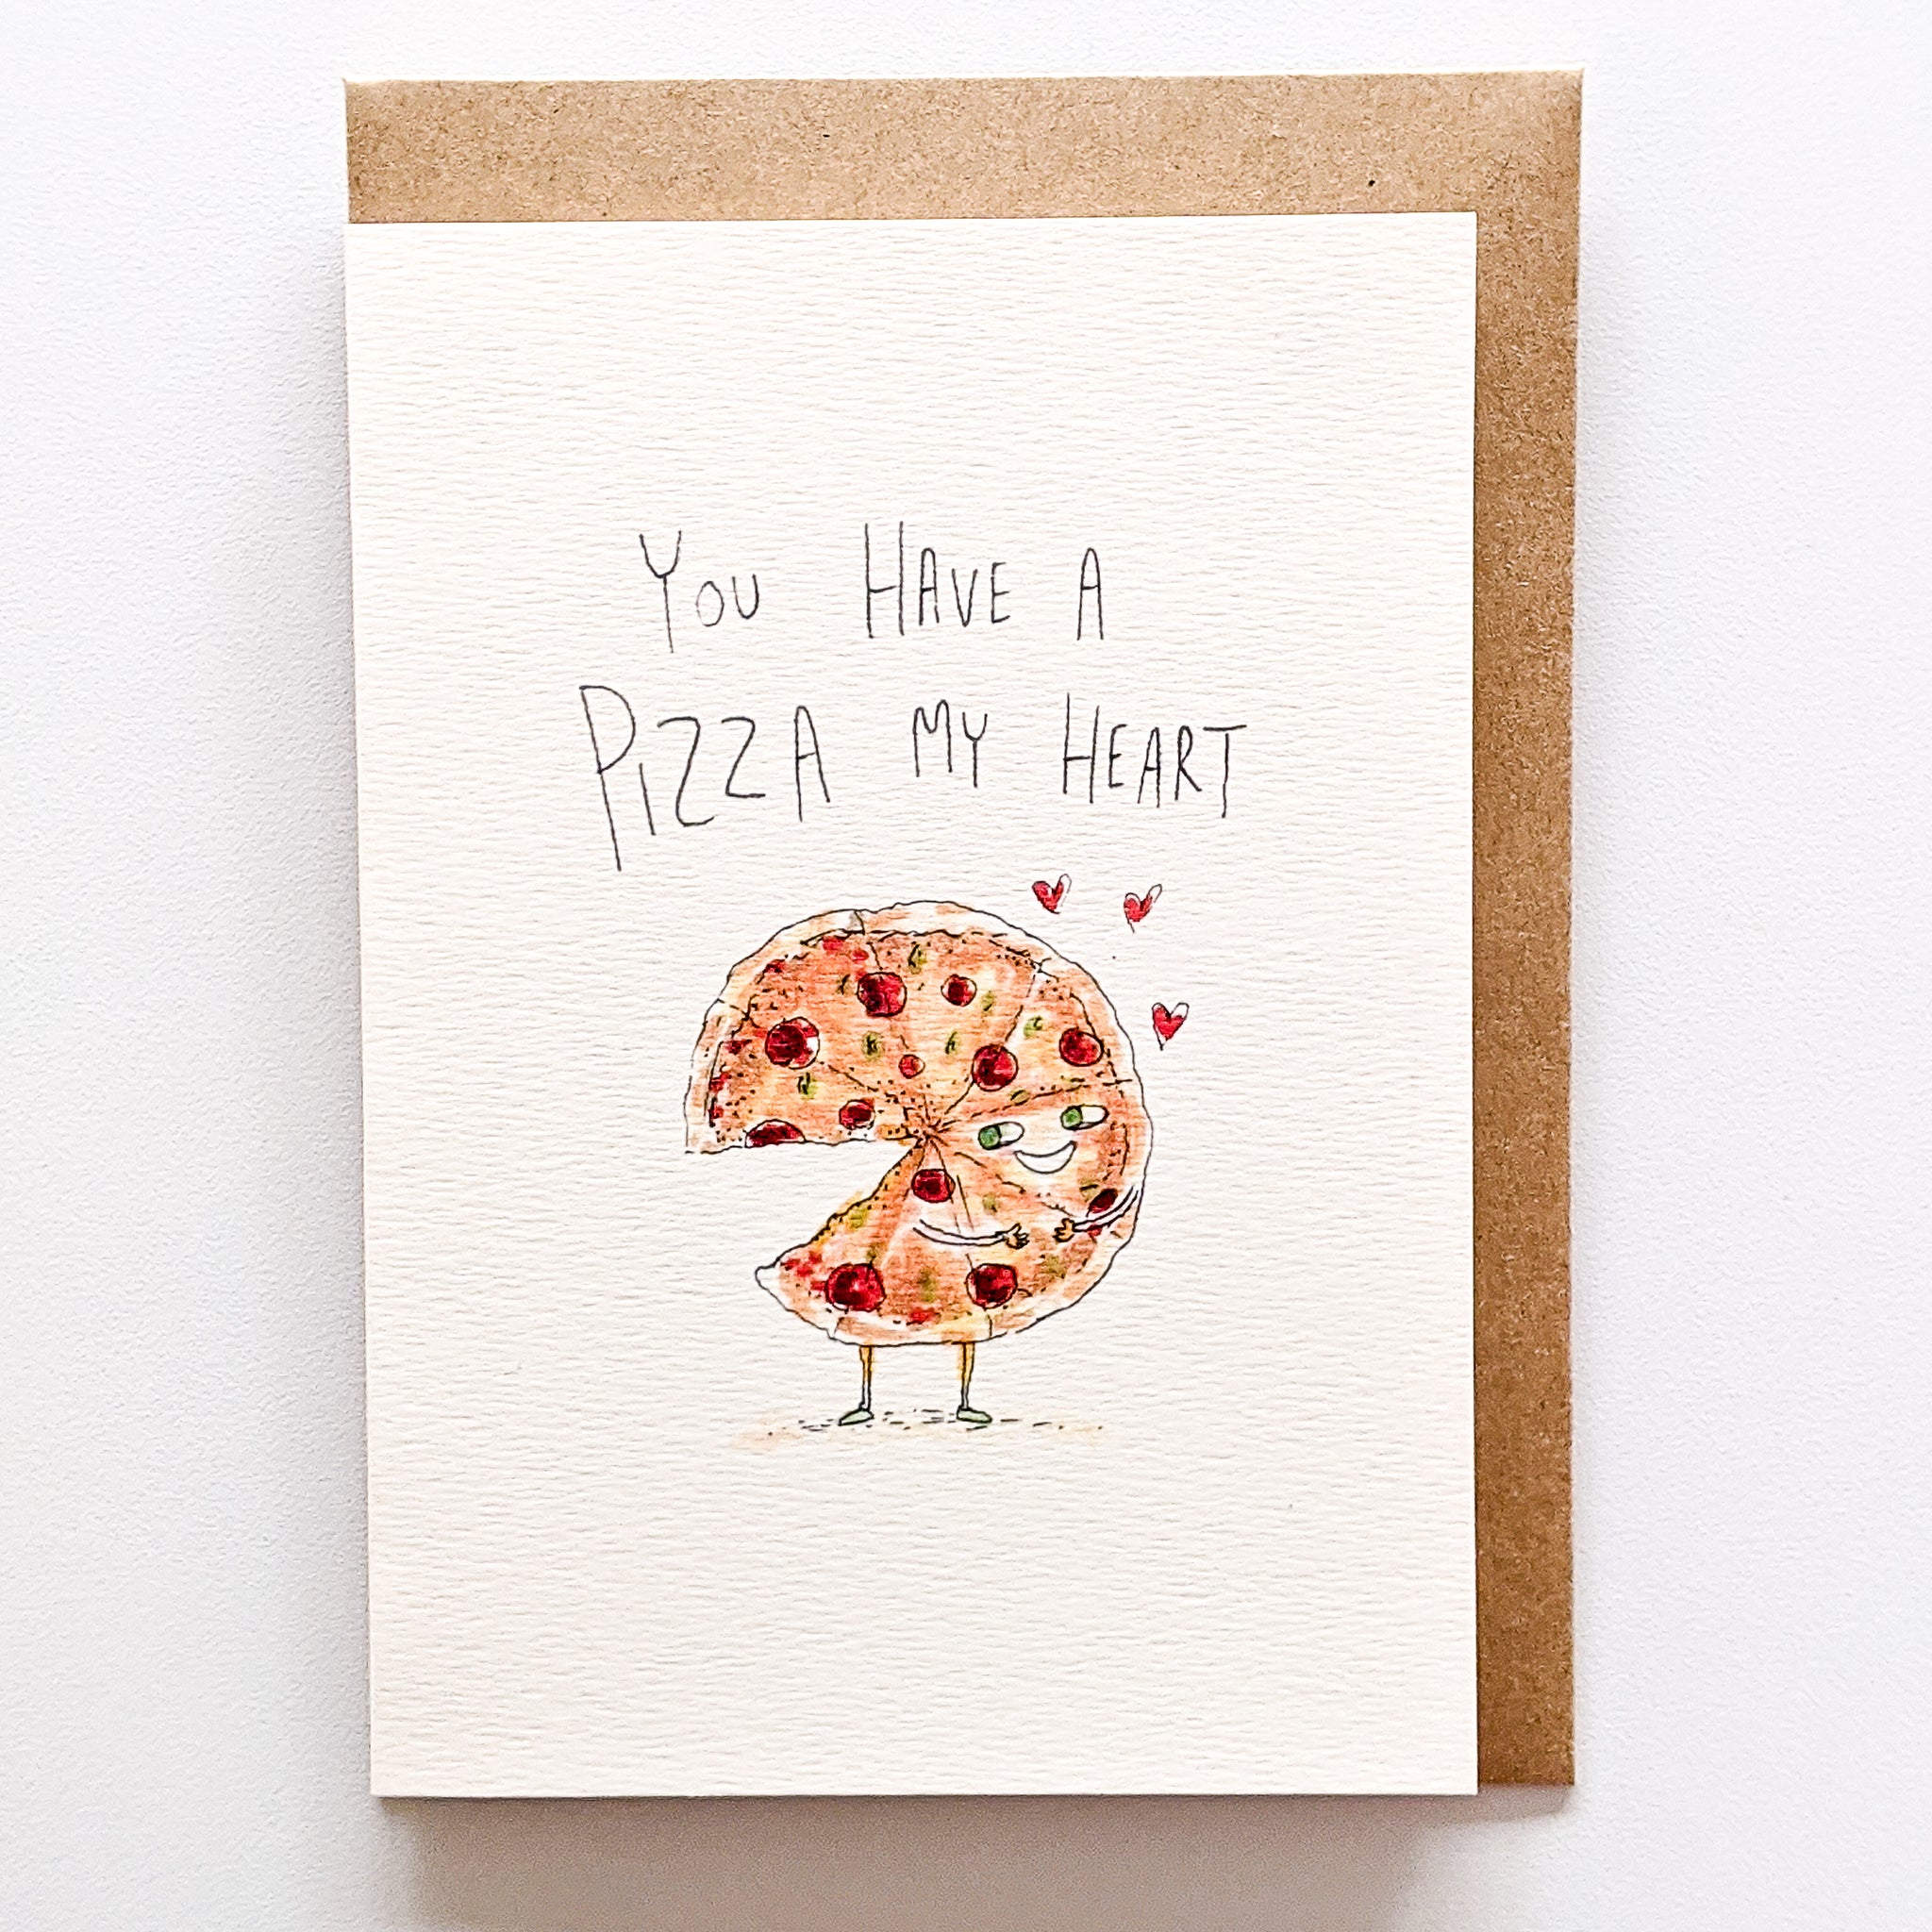 You Have a Pizza My Heart - Well Drawn